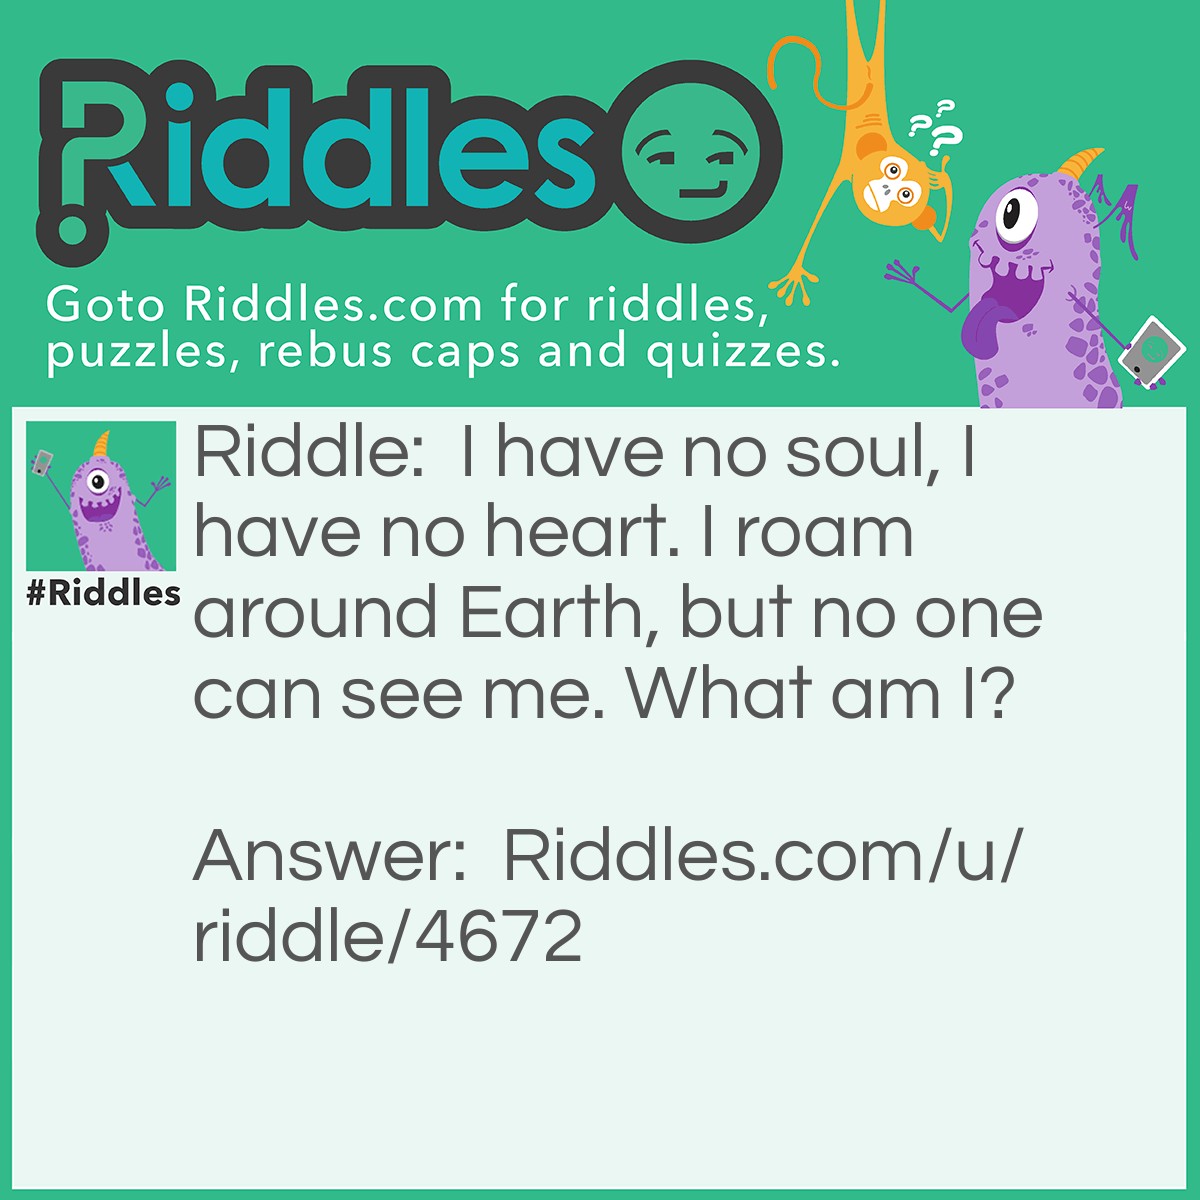 Riddle: I have no soul, I have no heart. I roam around Earth, but no one can see me. What am I? Answer: A ghost.